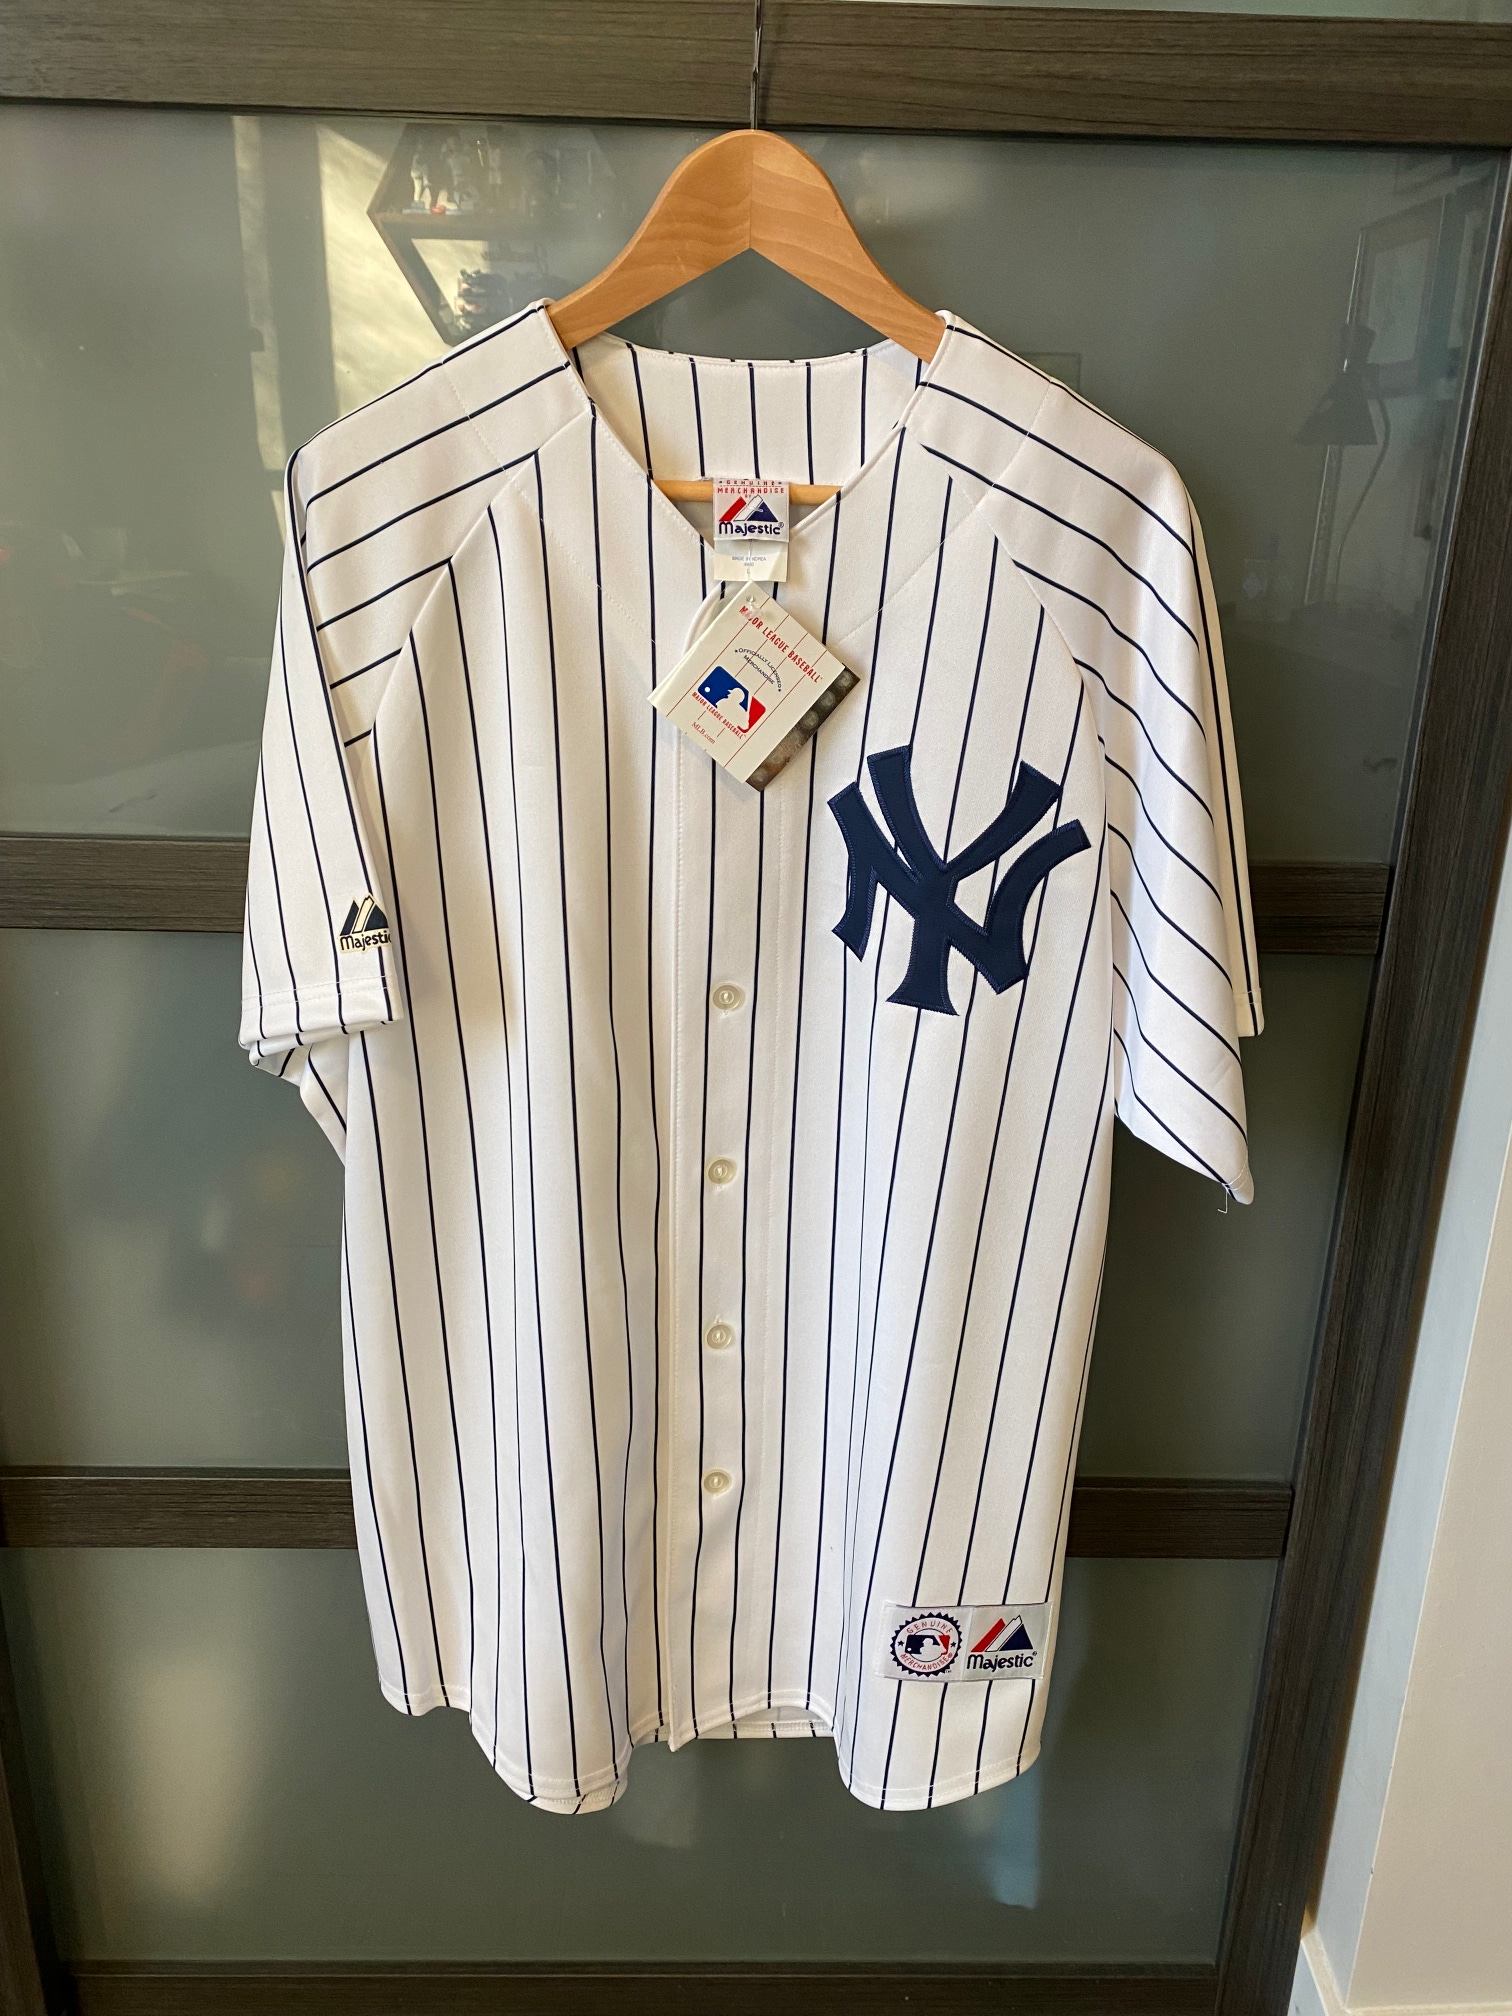 White New Large Men's Majestic 6400 Jersey - New York Yankees